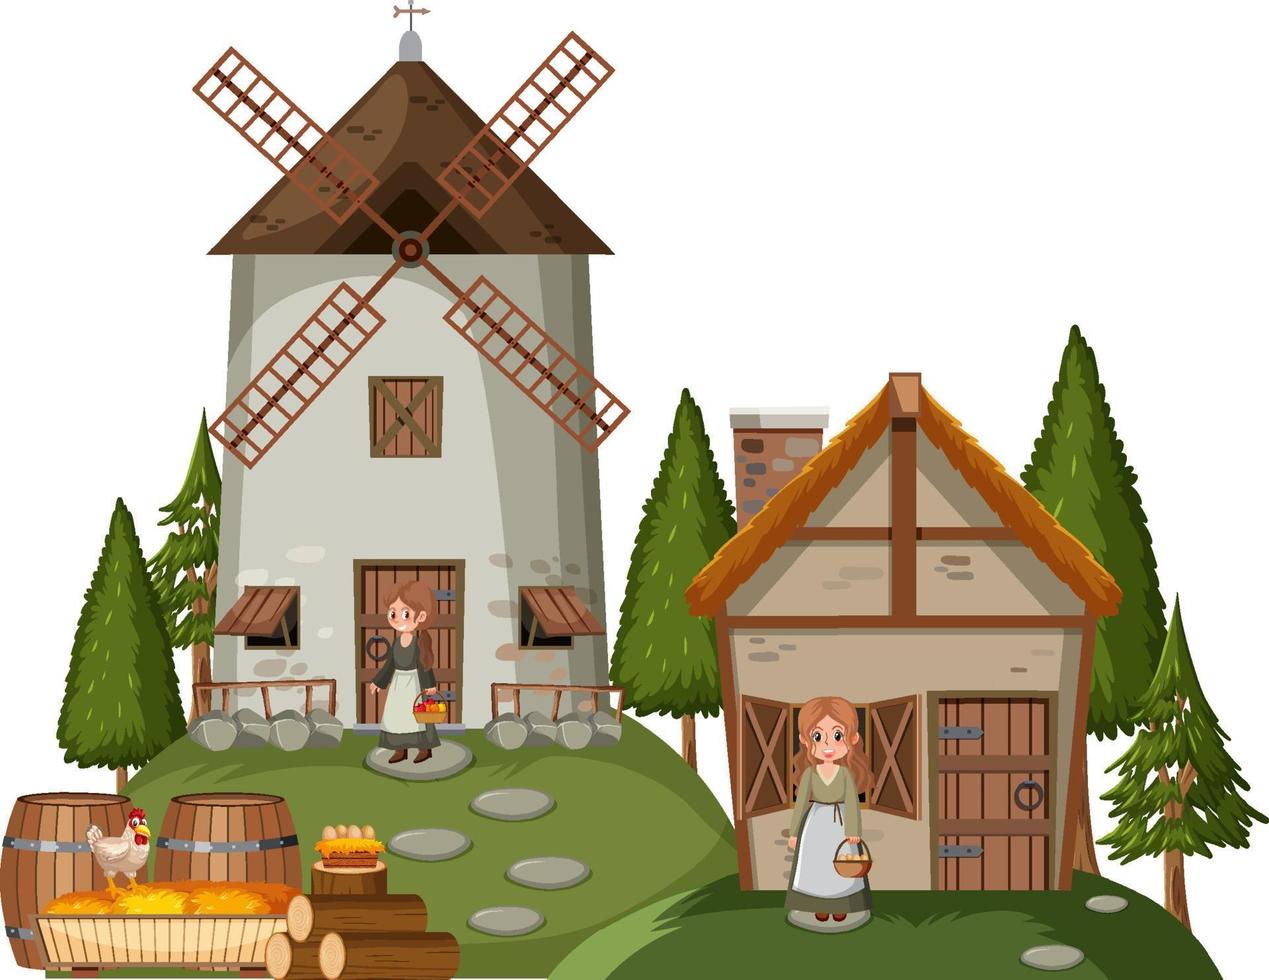 Medieval historical building in cartoon style vector